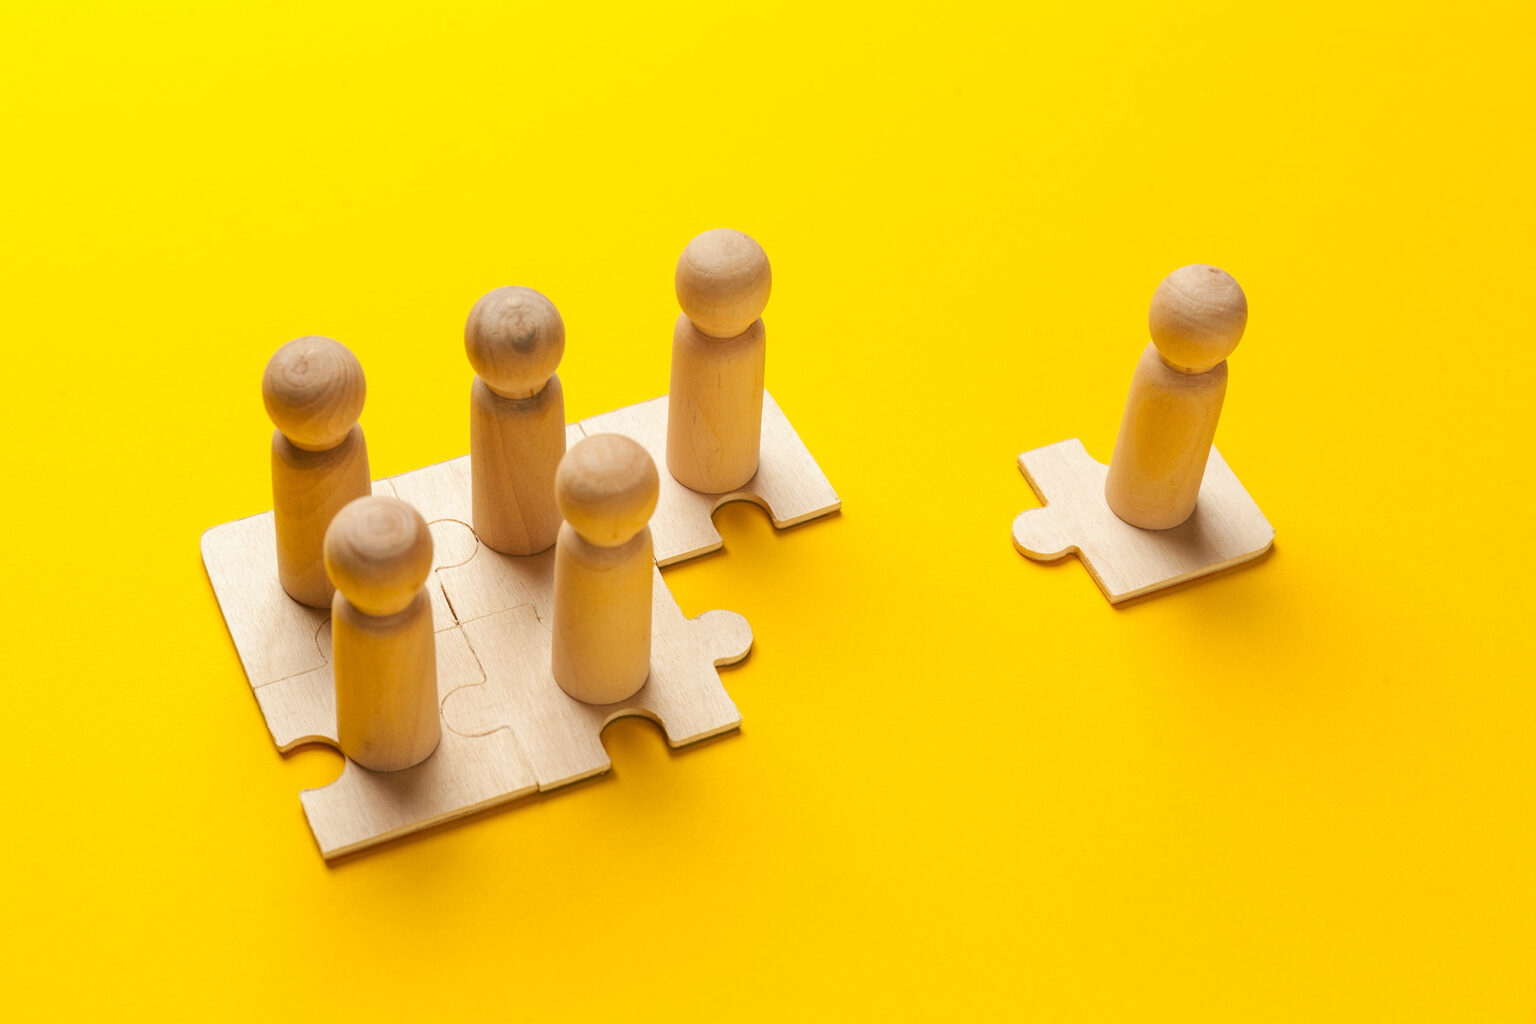 Wooden figures on puzzle pieces on yellow background